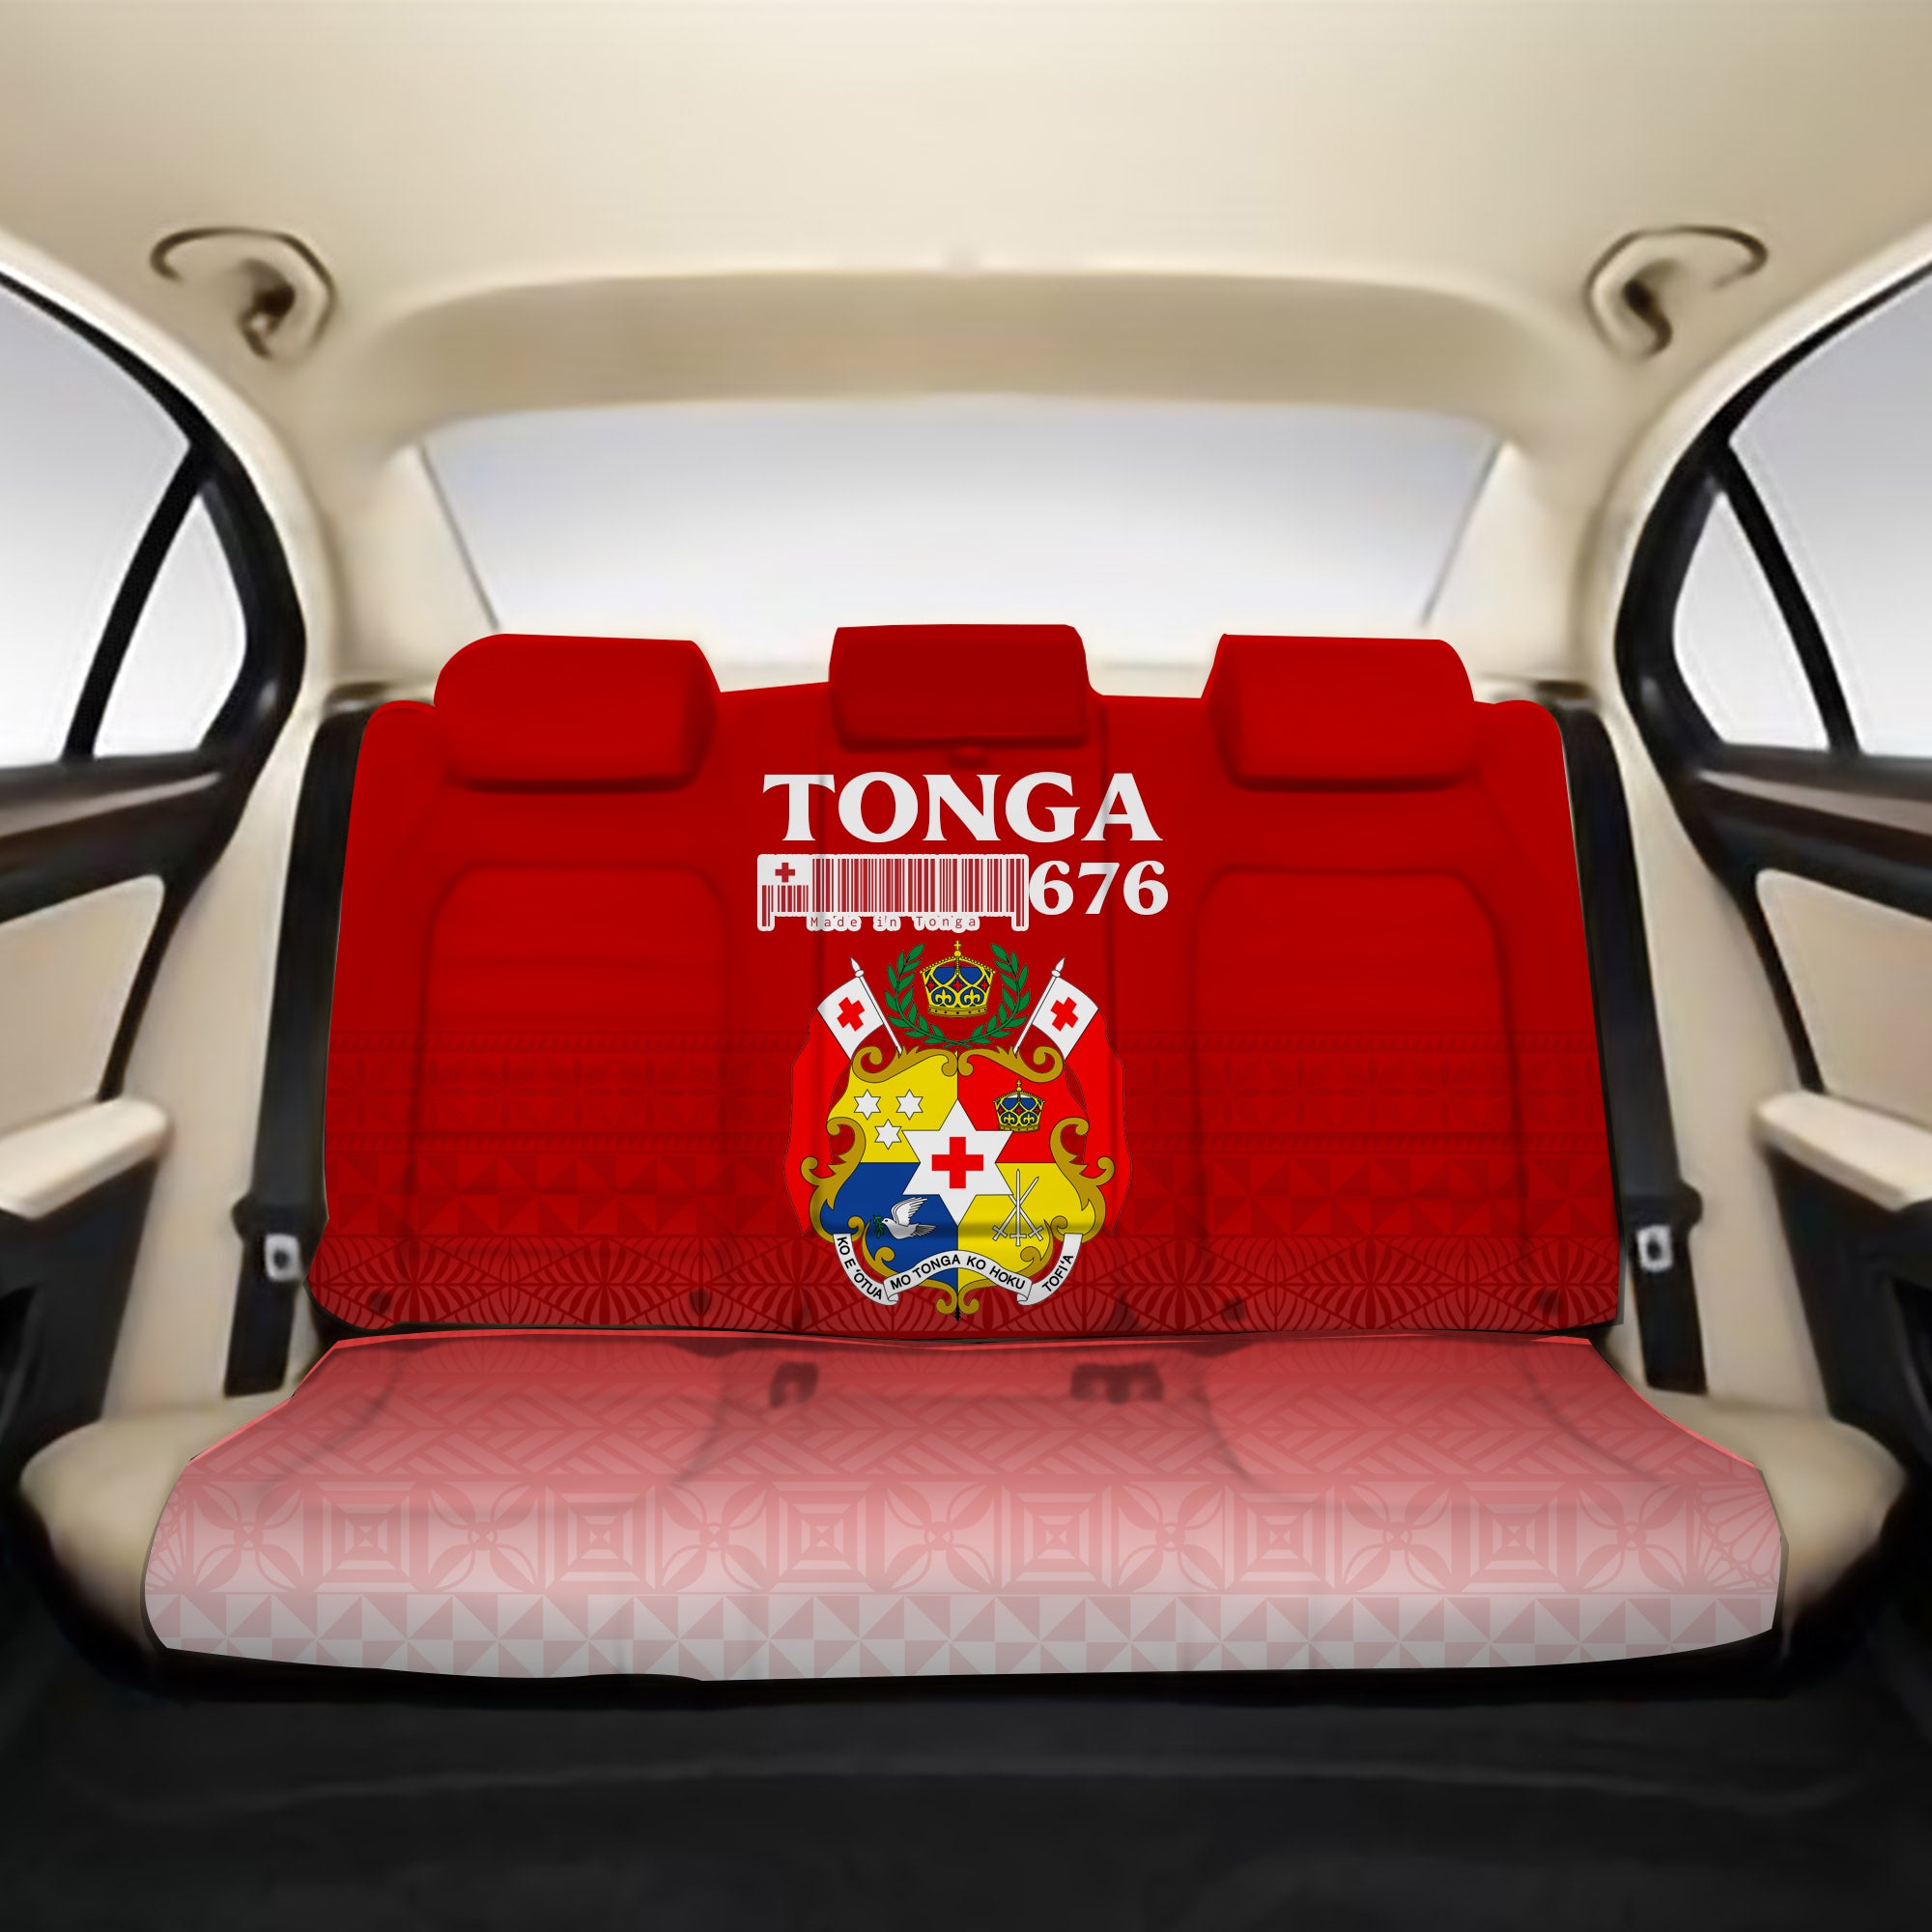 Tonga 676 Tongan Pattern Back Seat Covers - LT12 One Size Red Back Car Seat Covers - Polynesian Pride